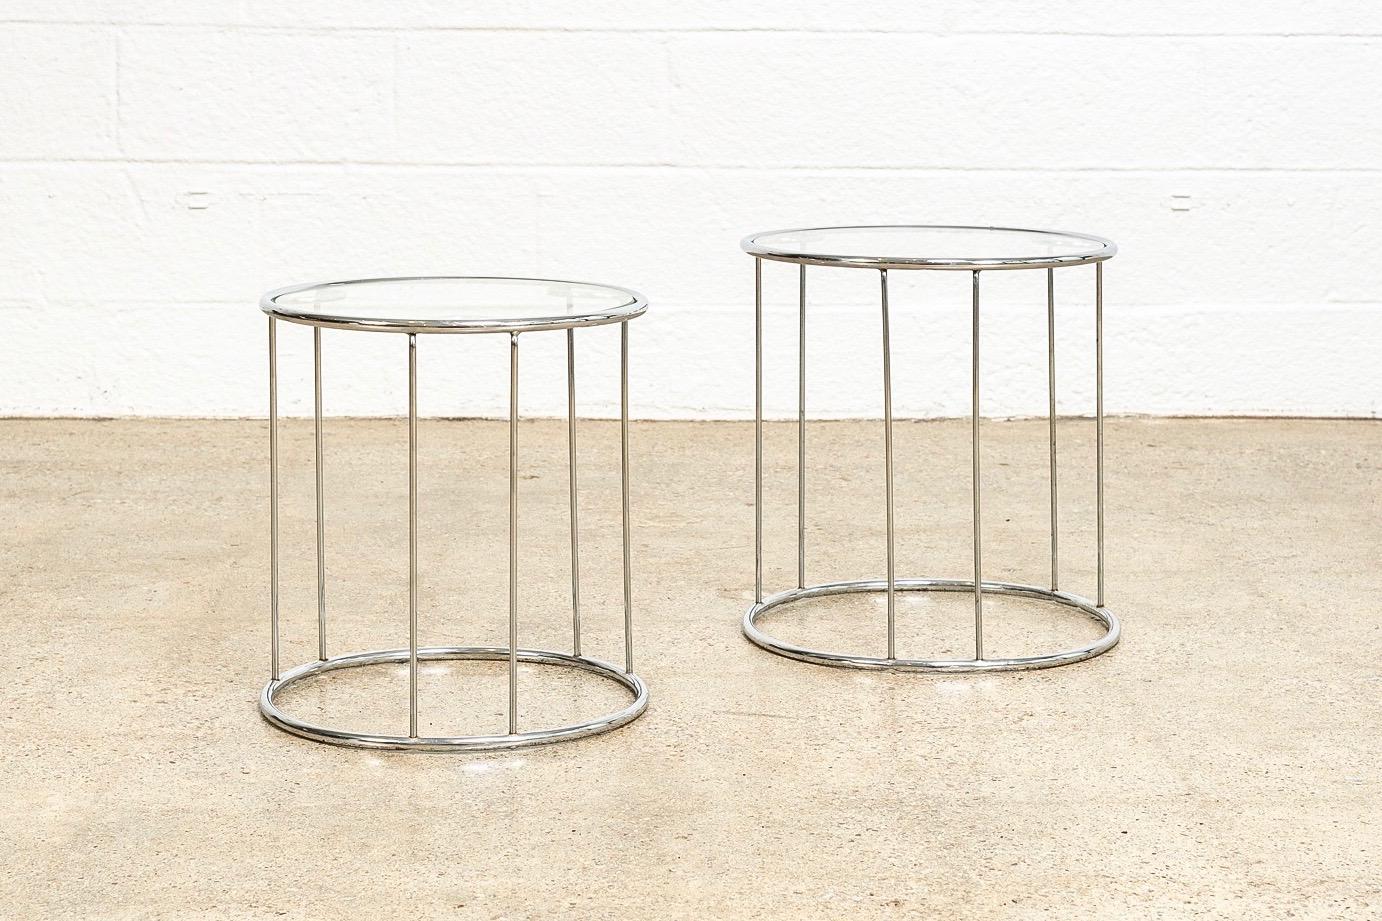 This two-piece set of vintage Mid-Century Modern Milo Baughman style round nesting tables is circa 1970. The elegant, Minimalist design features a chrome-plated round spoke frame with removable glass tops. One slightly larger table fits neatly over